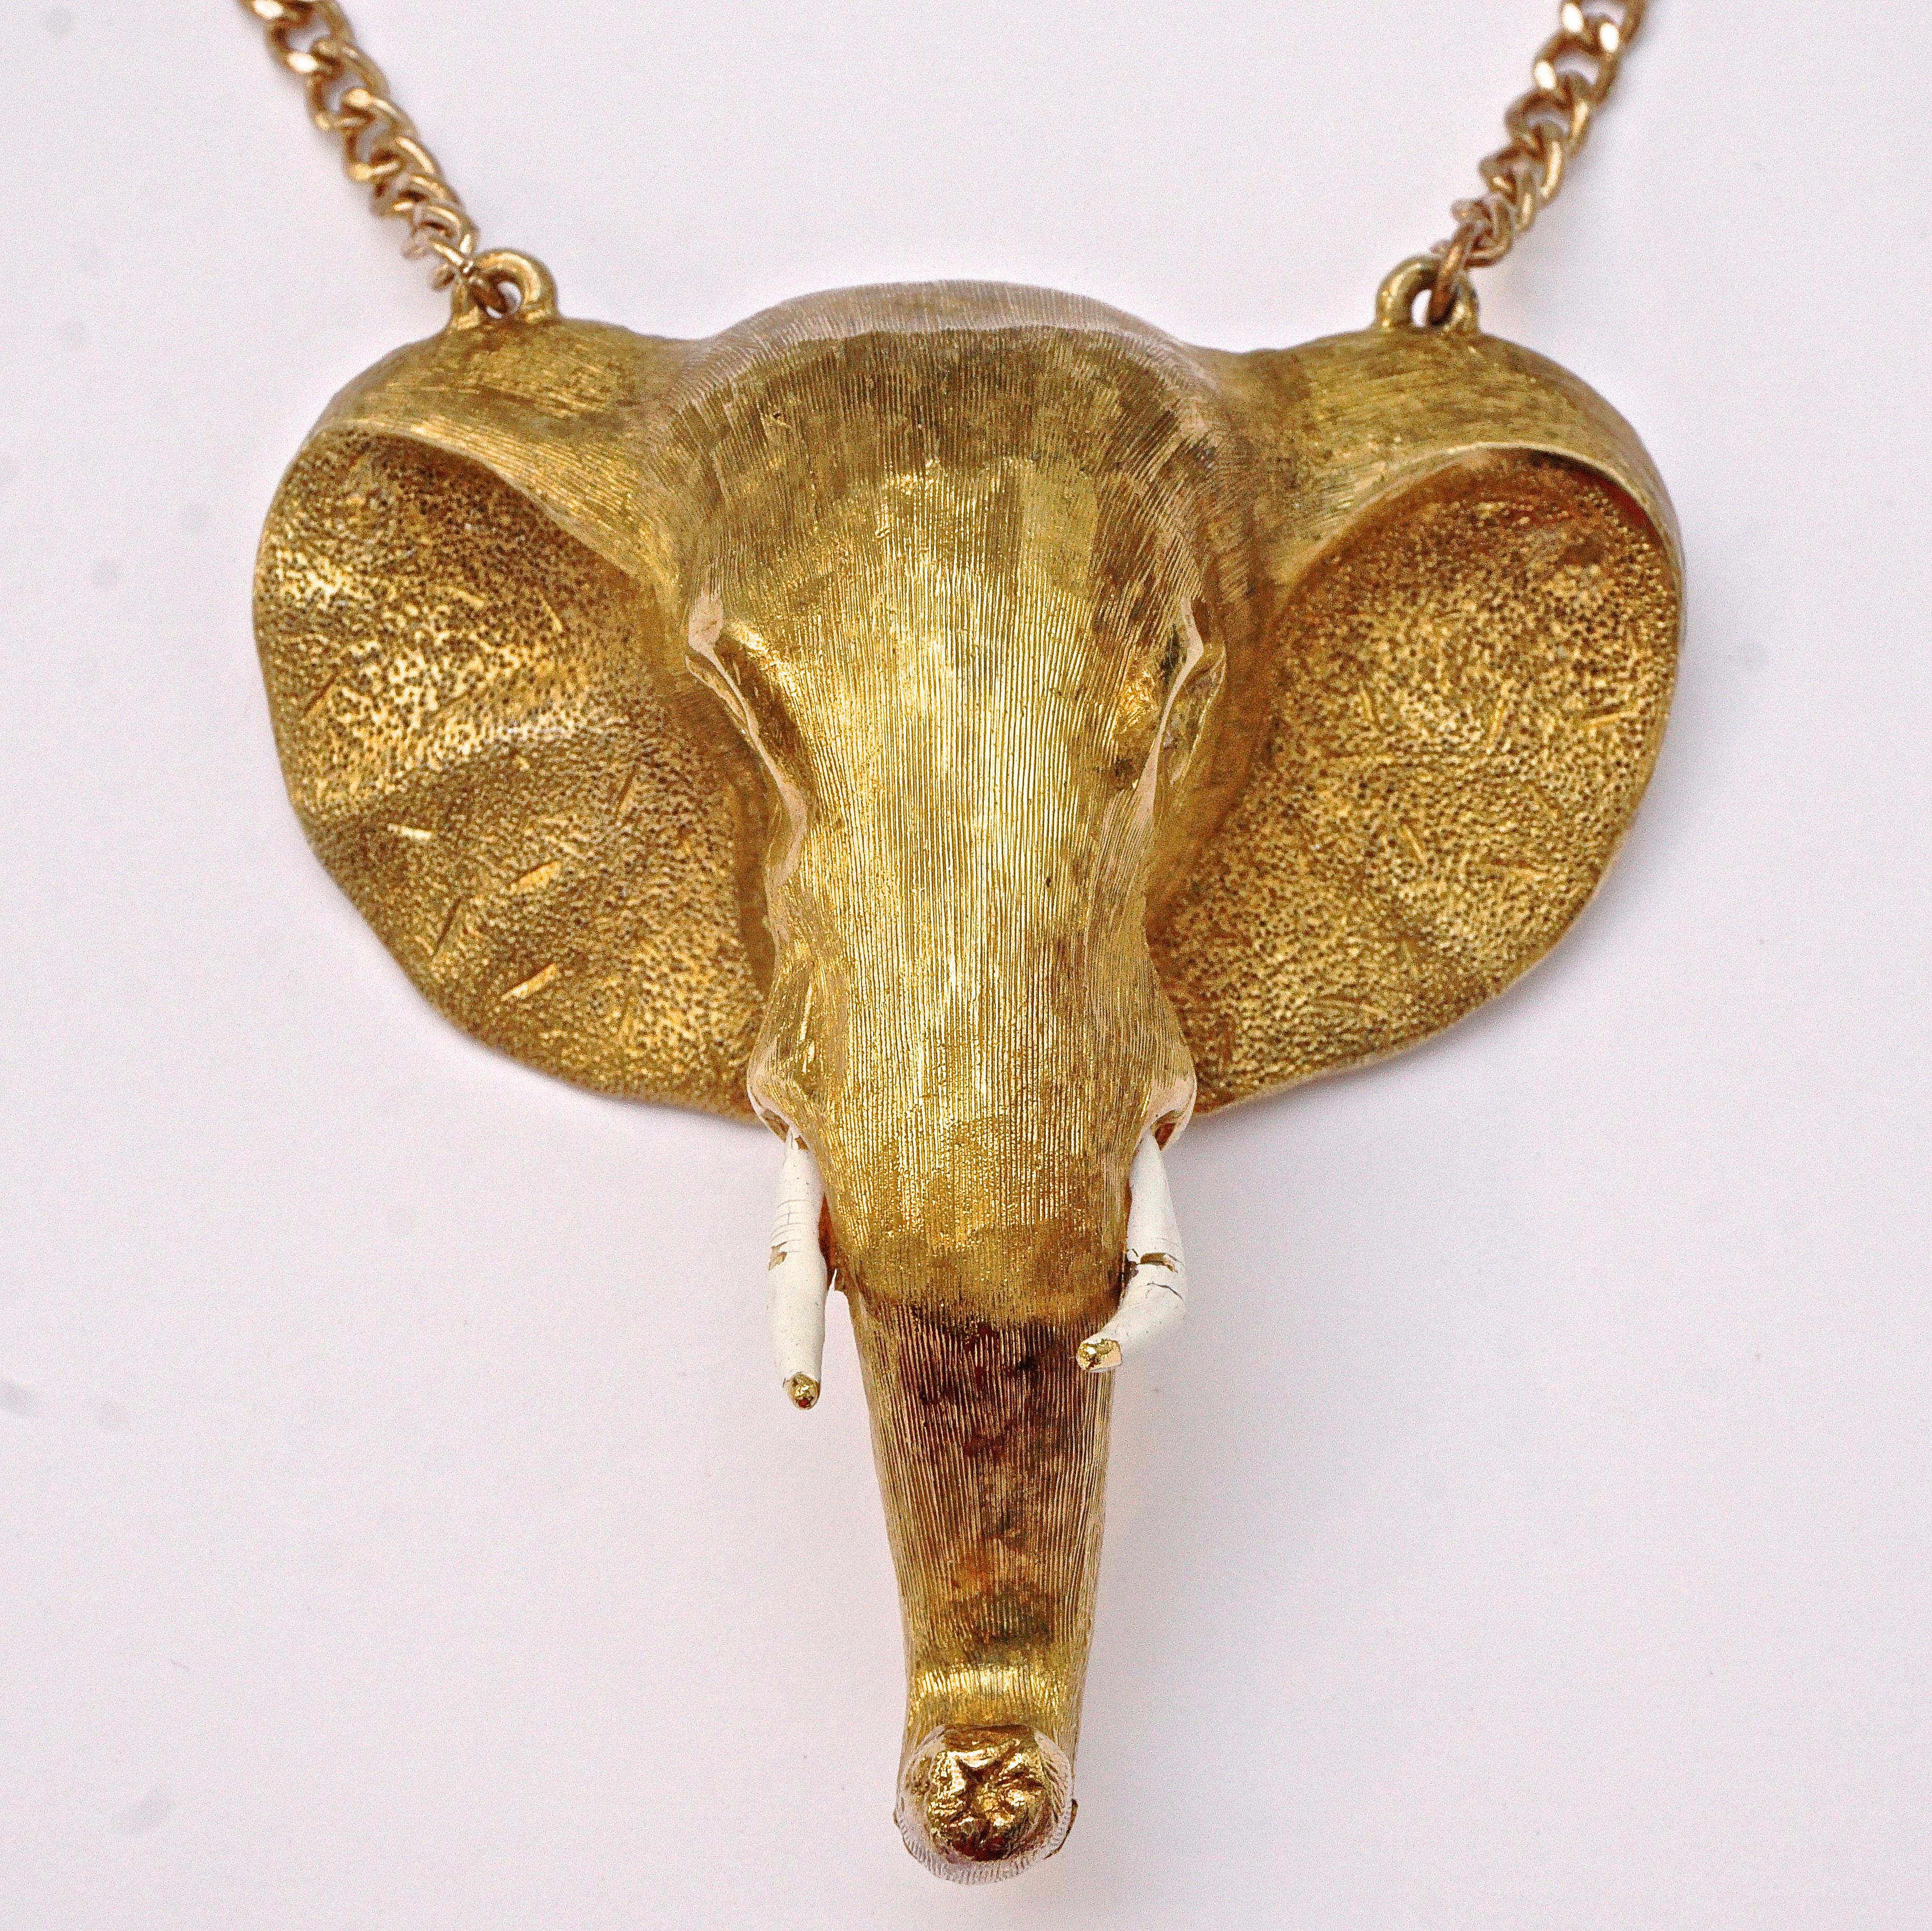 Fabulous gold plated elephant head pendant chain necklace, the elephant is also a brooch with a quality bar pin. The curb link chain may not be the original, and measures 58cm / 22.8 inches. The heavy elephant head is textured, and has clear crystal